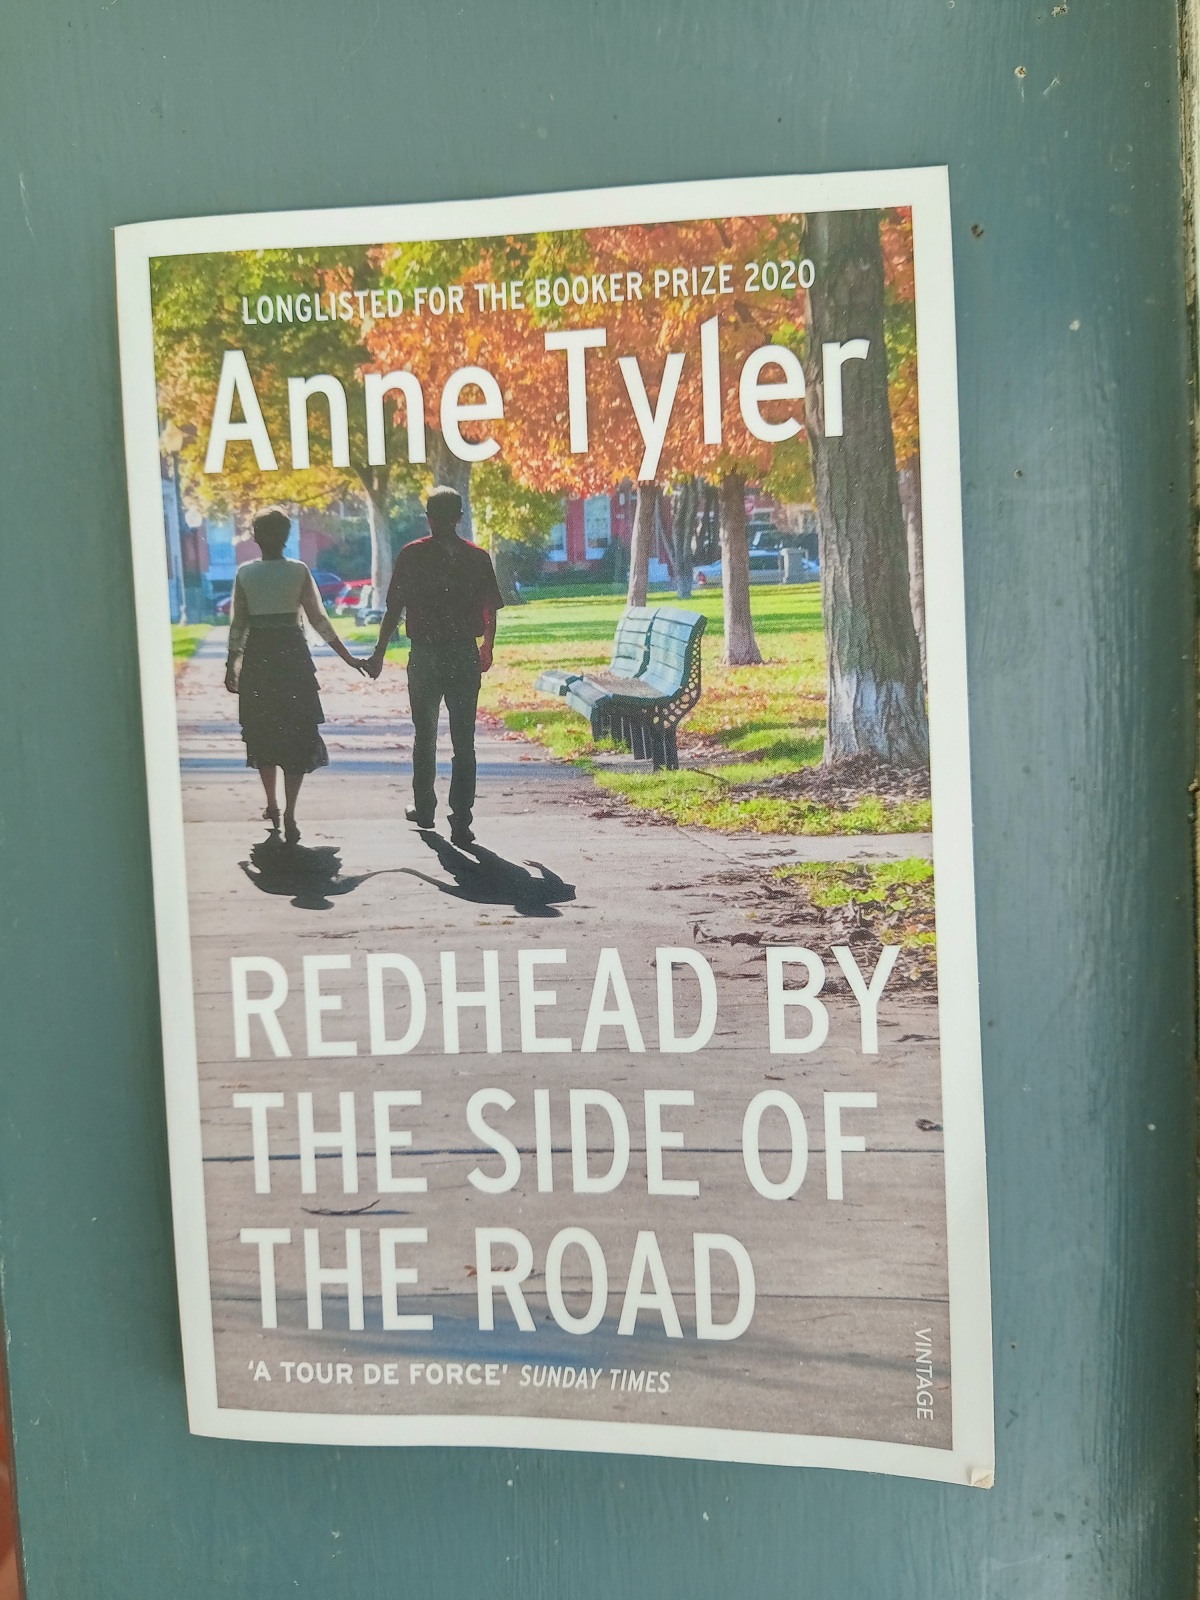 Giving and receiving books is exposing your heart	          Redhead by the Side of the Road by Anne Tyler